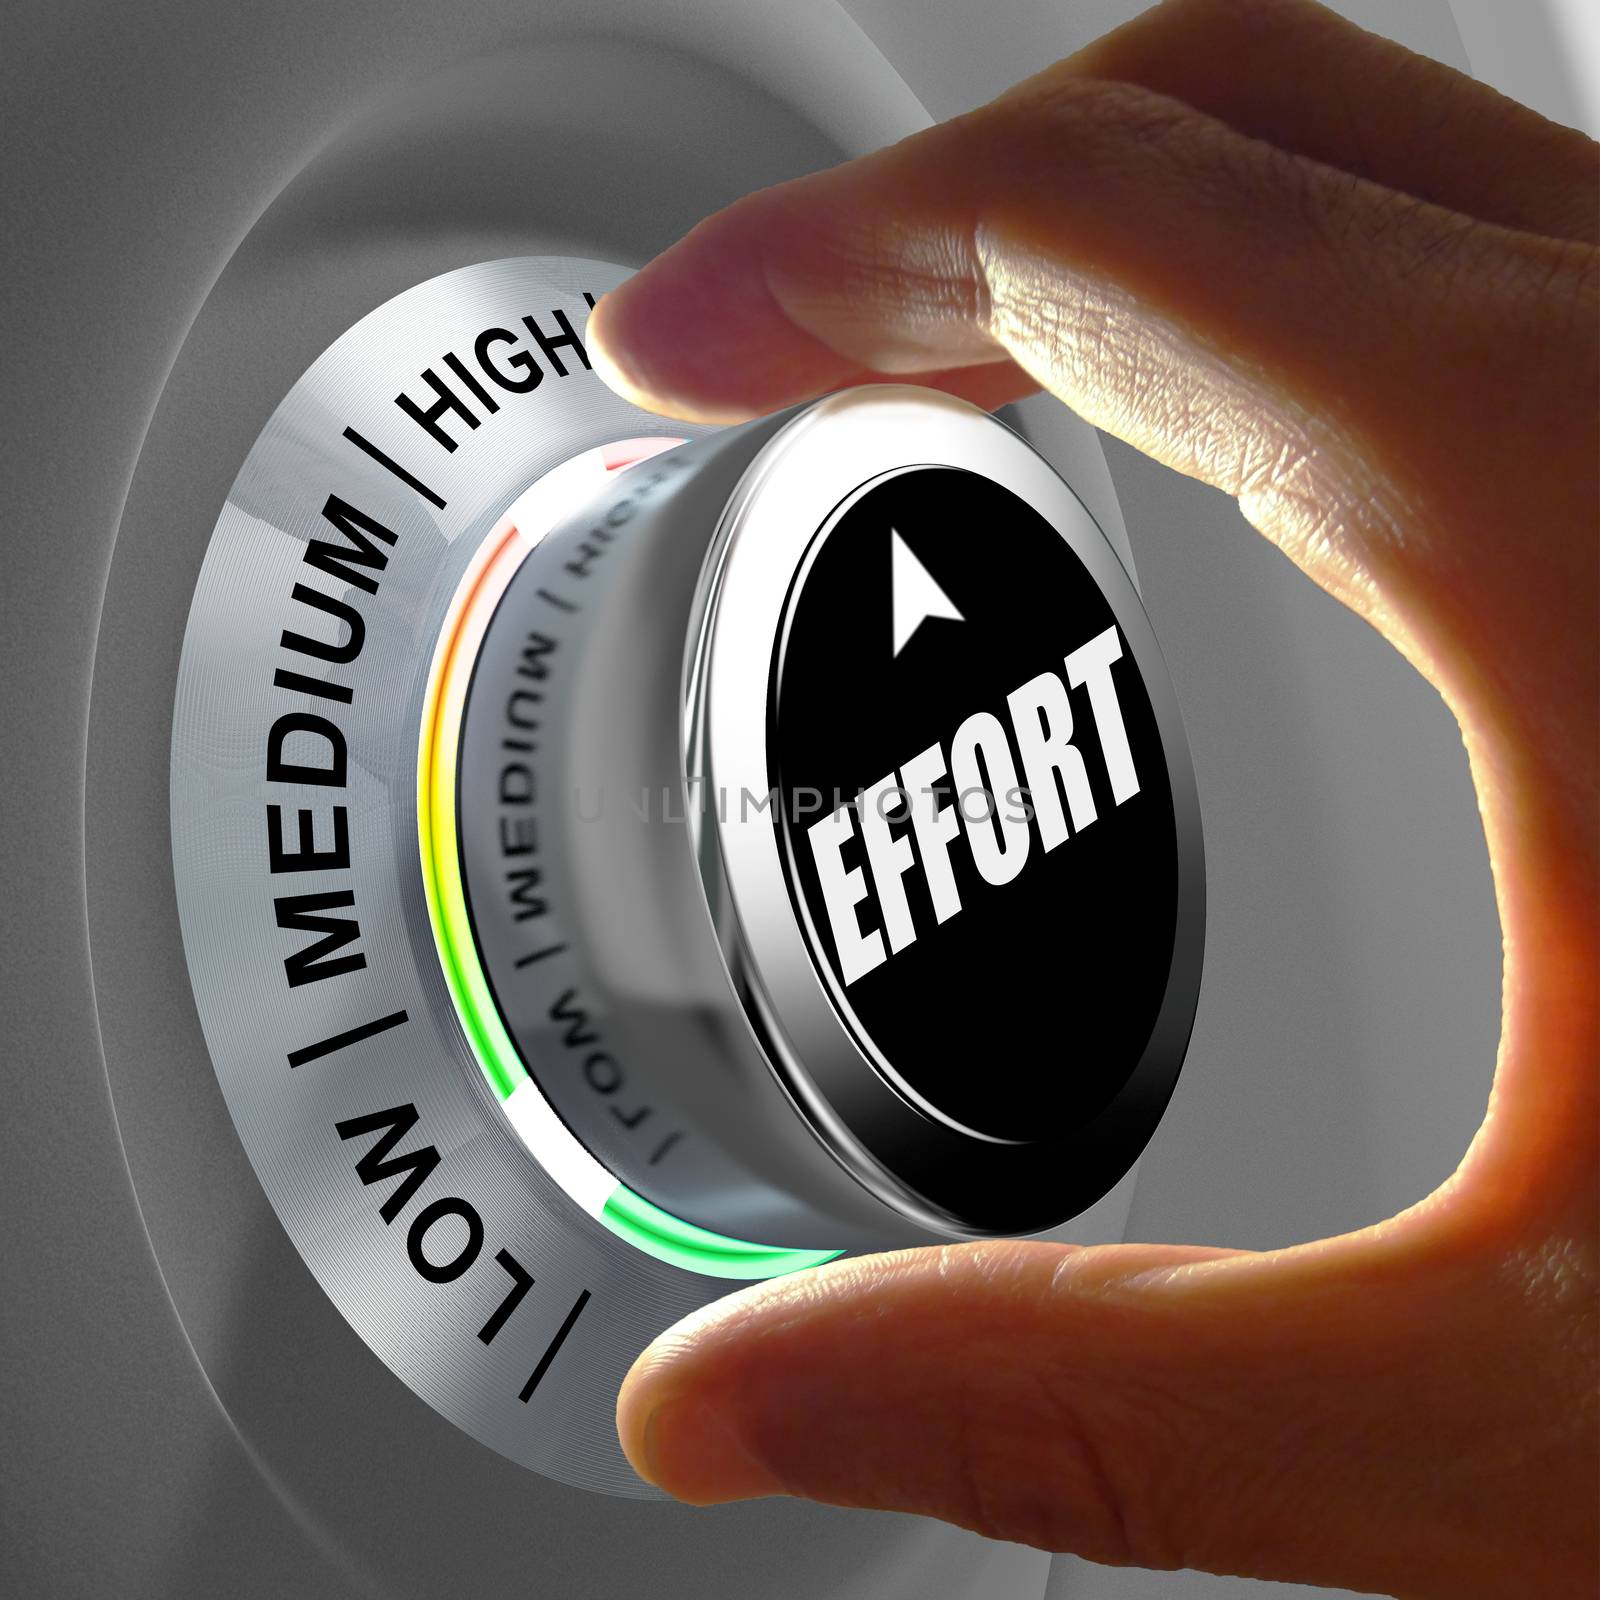 Hand rotating a button and selecting the level of effort. This concept illustration is a metaphor for choosing the level of effort in order to reach a goal. Three levels are available: low, medium and high.